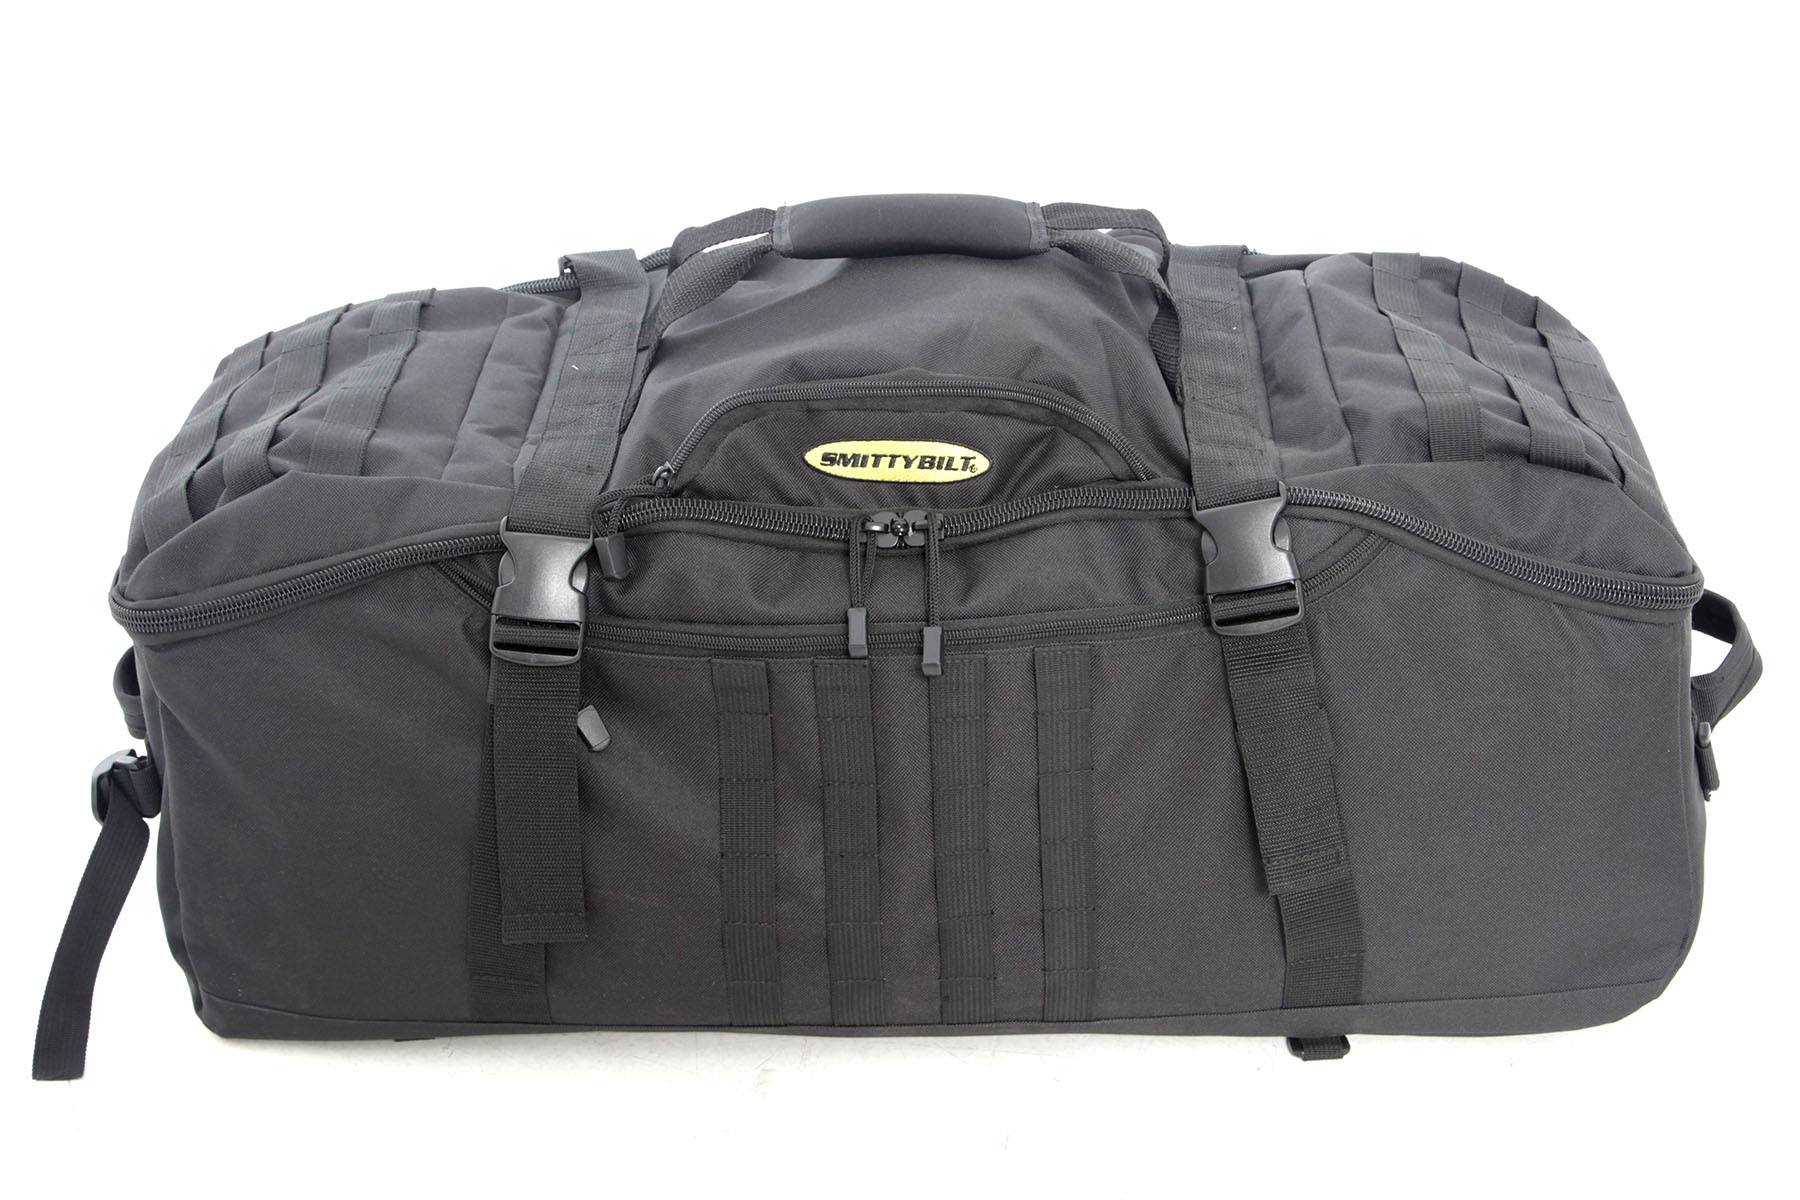 Smittybilt Trail Gear Bag with Storage Compartment - Click Image to Close